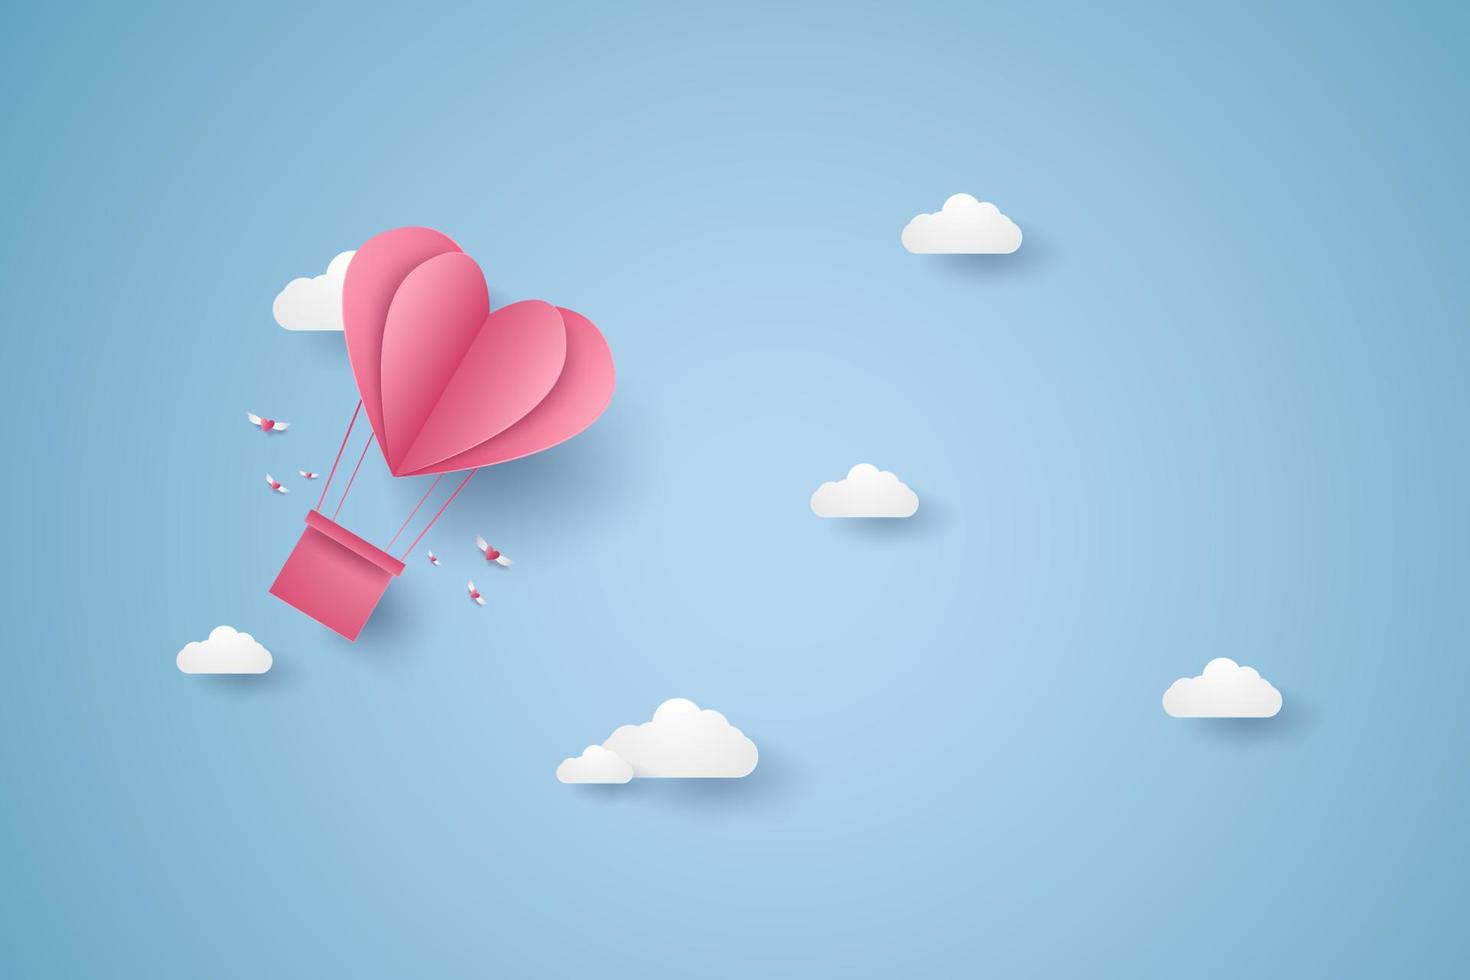 Valentines day, Illustration of love, pink heart hot air balloon flying in the blue sky, paper art style vector